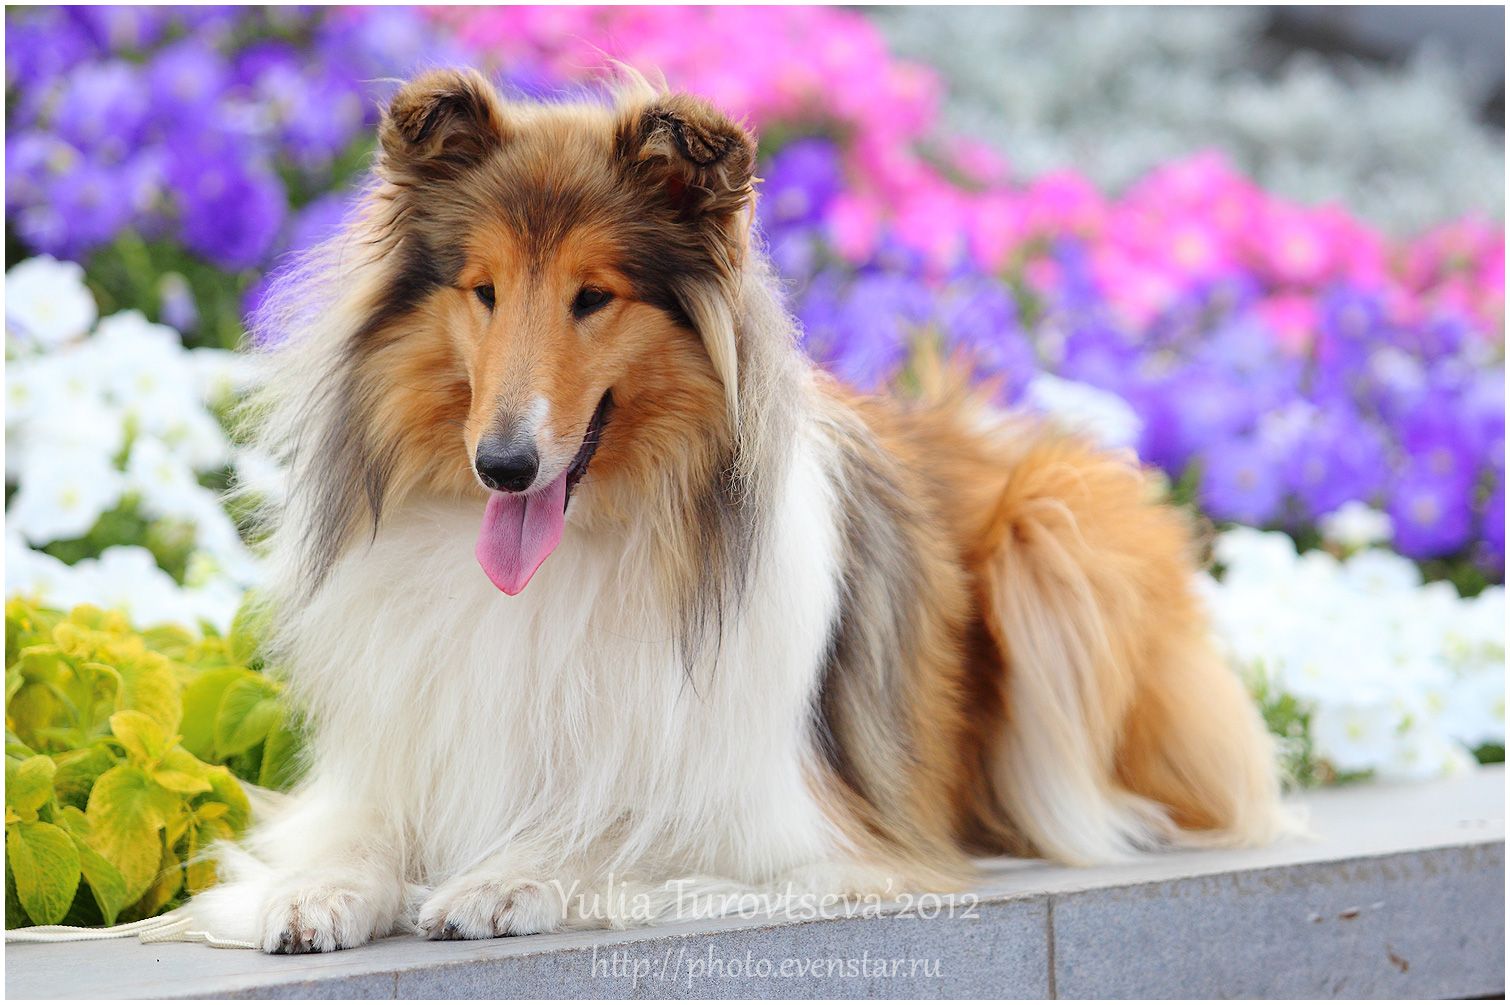 Collie Rough dog in flowers photo and wallpaper. Beautiful Collie Rough dog in flowers picture